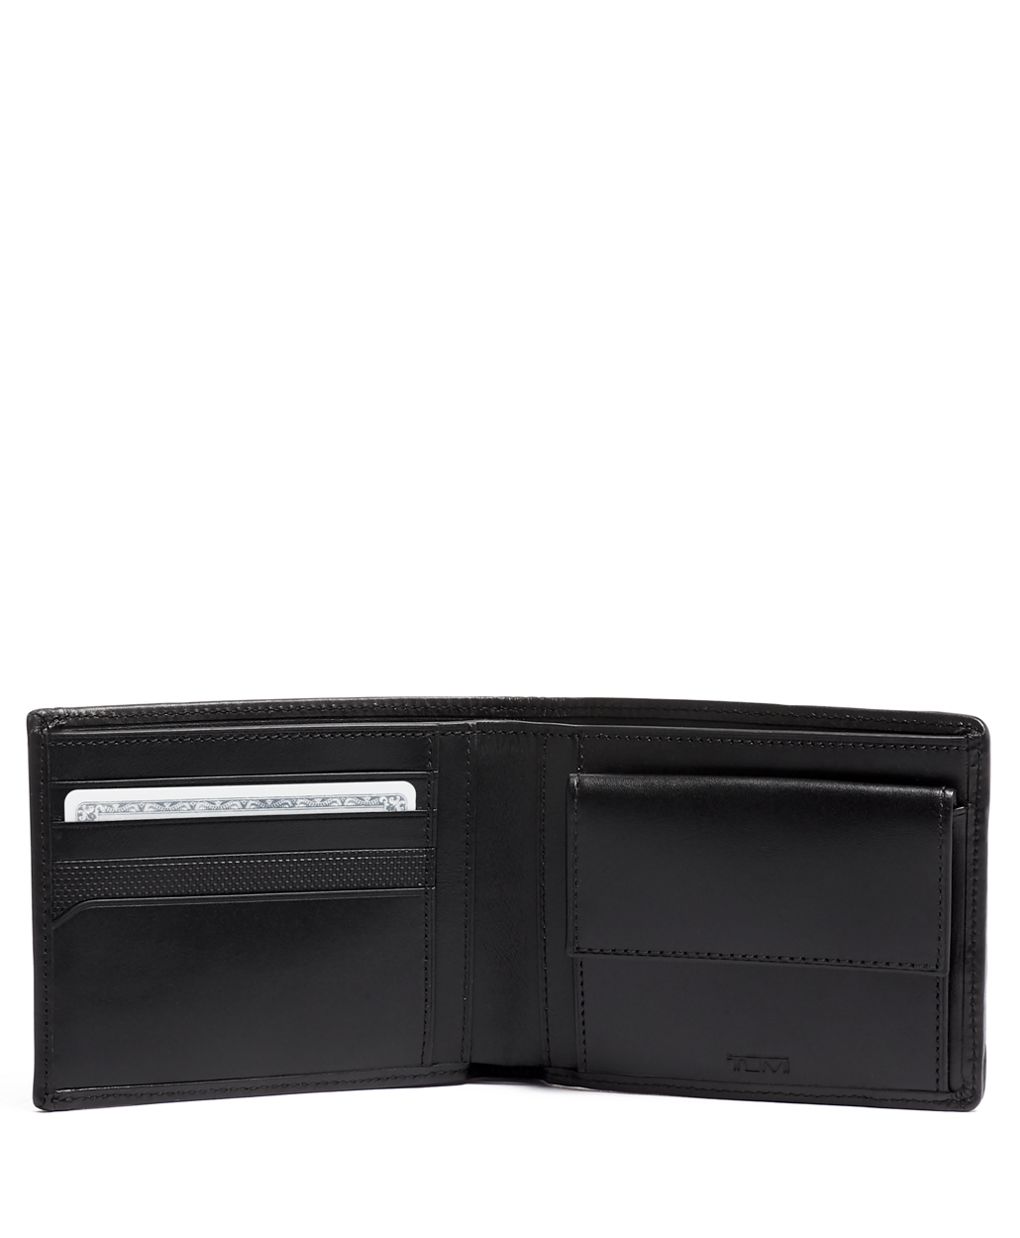 Global Wallet With Coin Pocket | Tumi US